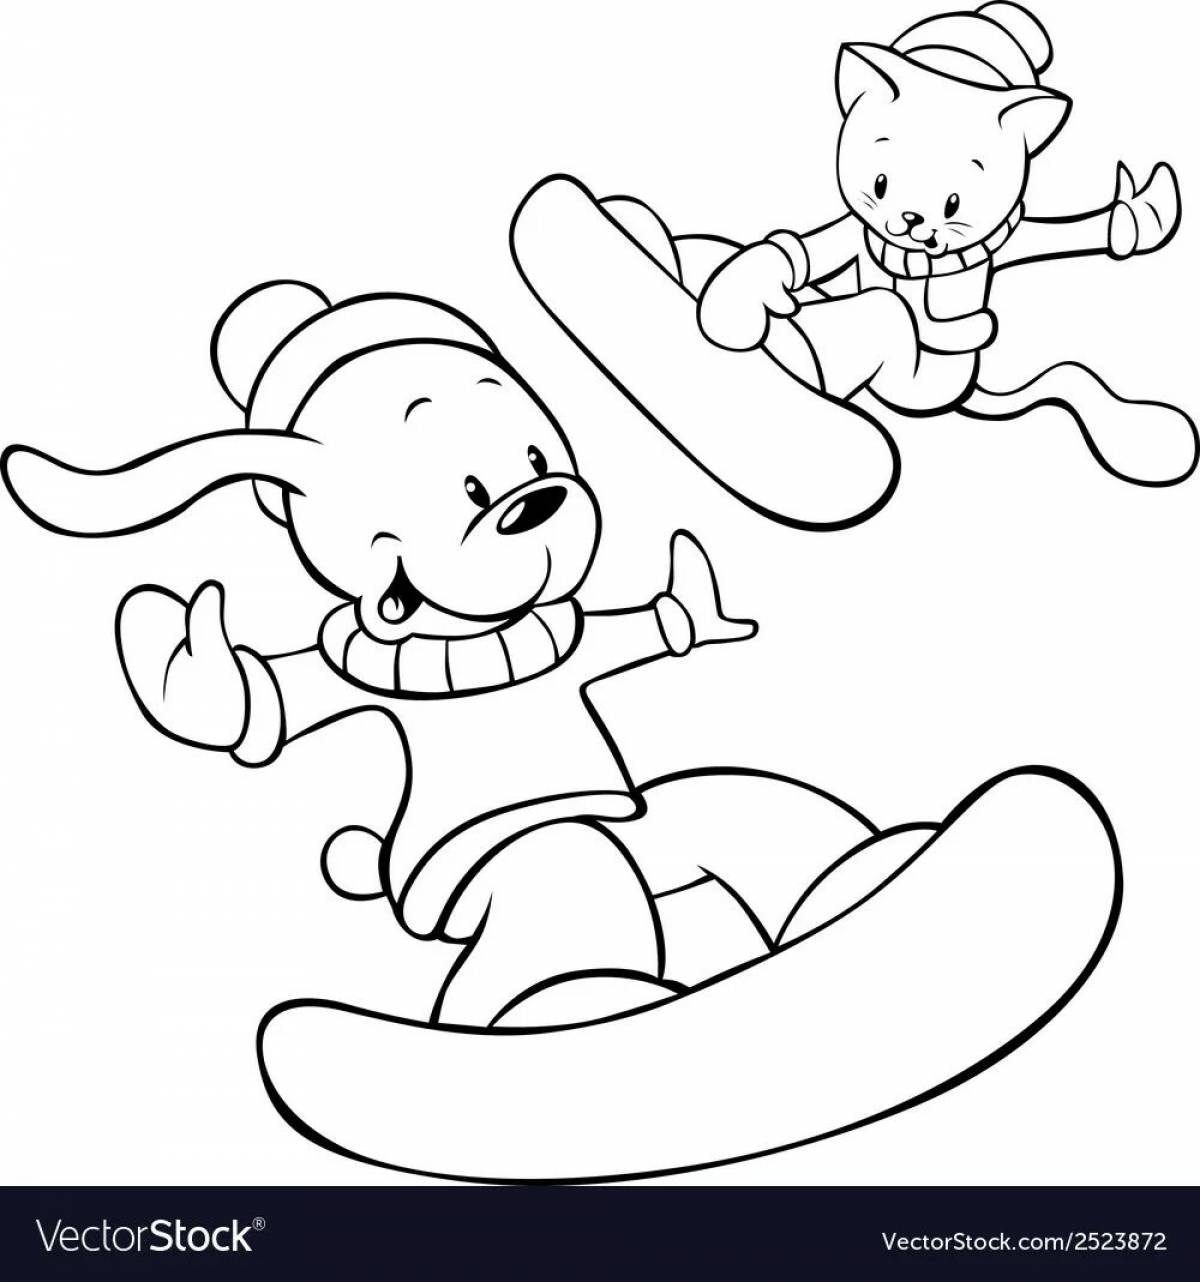 Animated snowboarder coloring page for kids